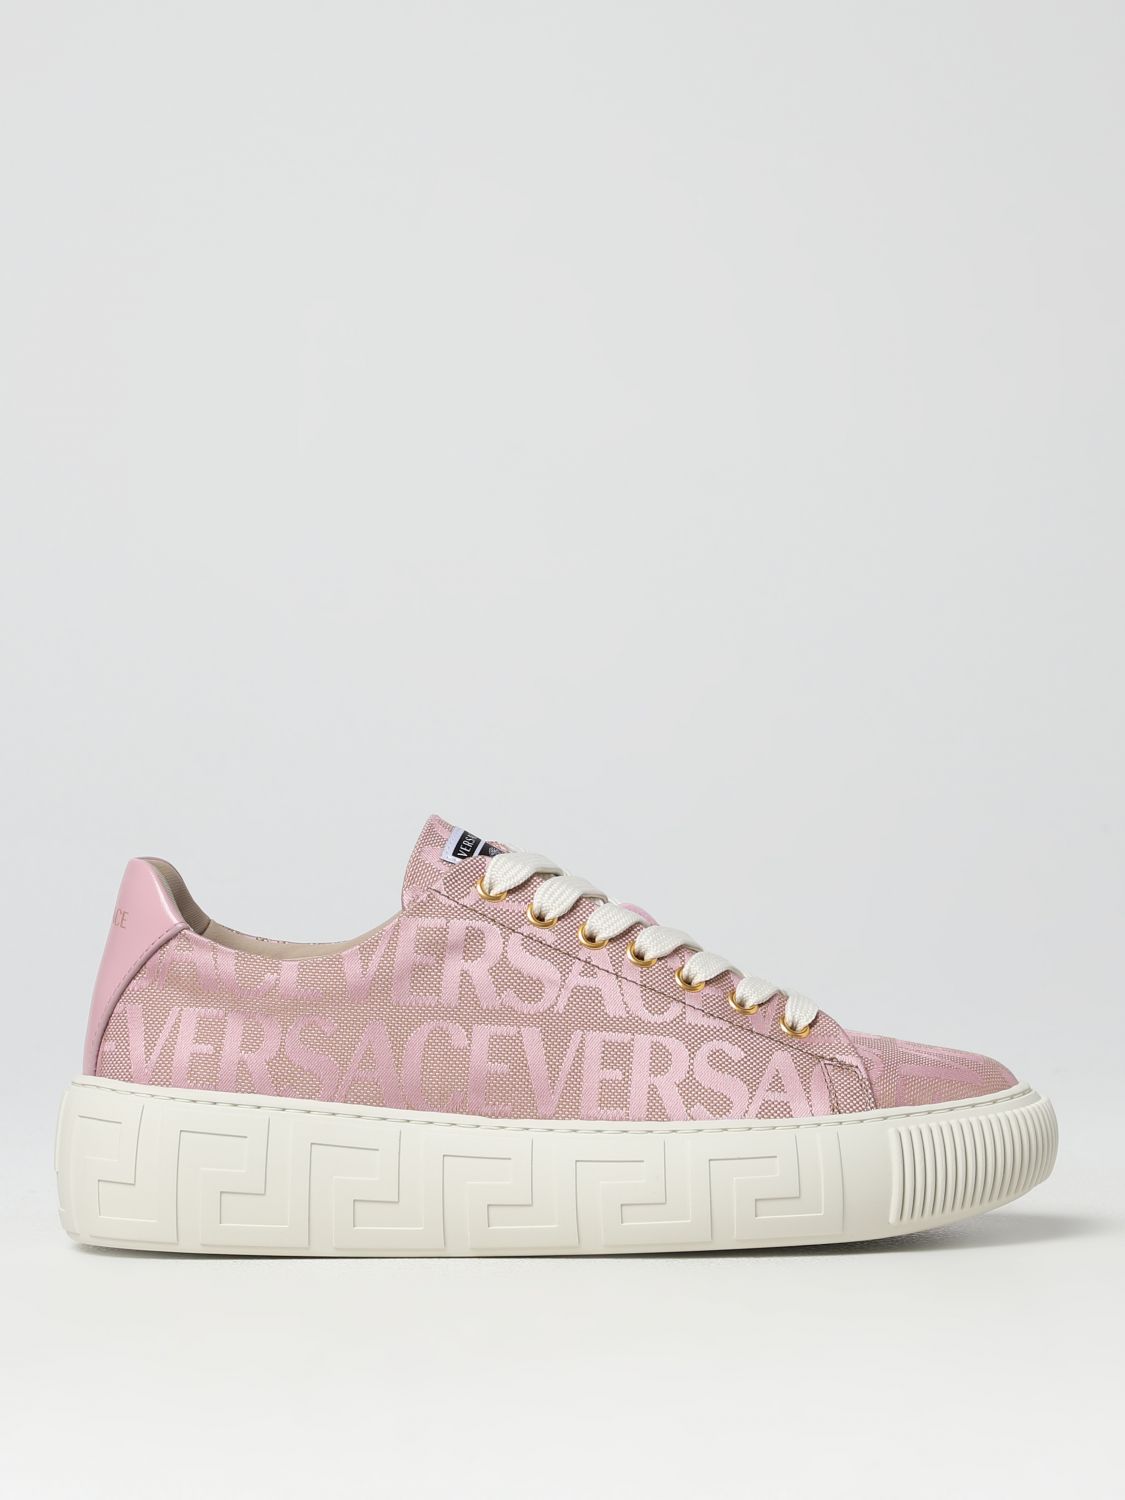 VERSACE SNEAKERS IN FABRIC WITH JACQUARD LOGO,388655010